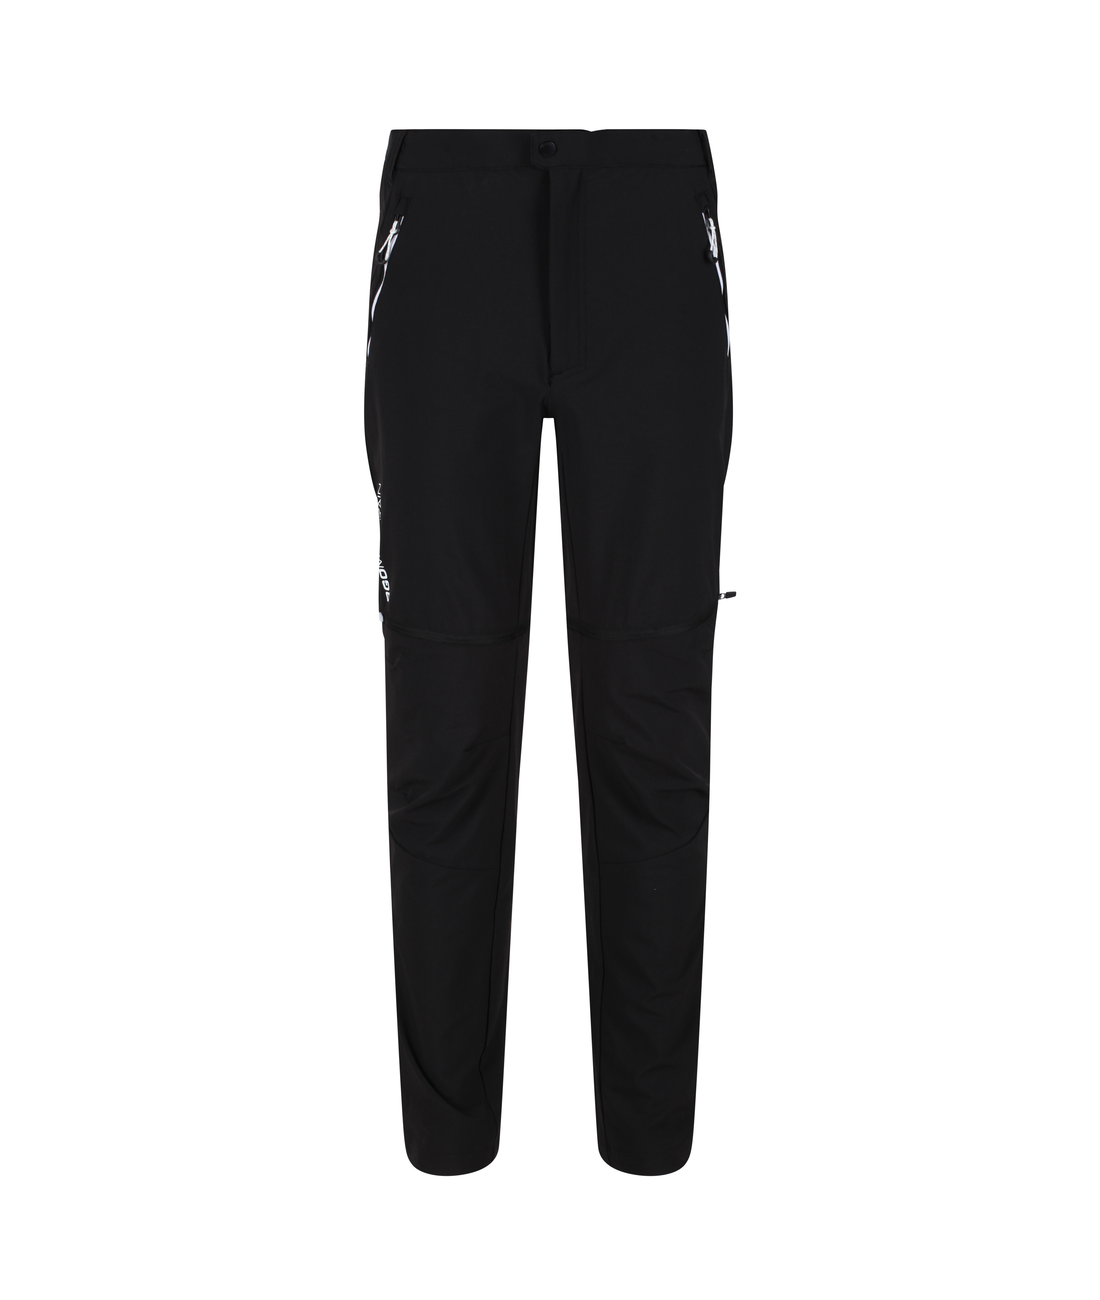 Mountain Zip-Off-Trousers - Herrenmodell, regulre Beinlnge